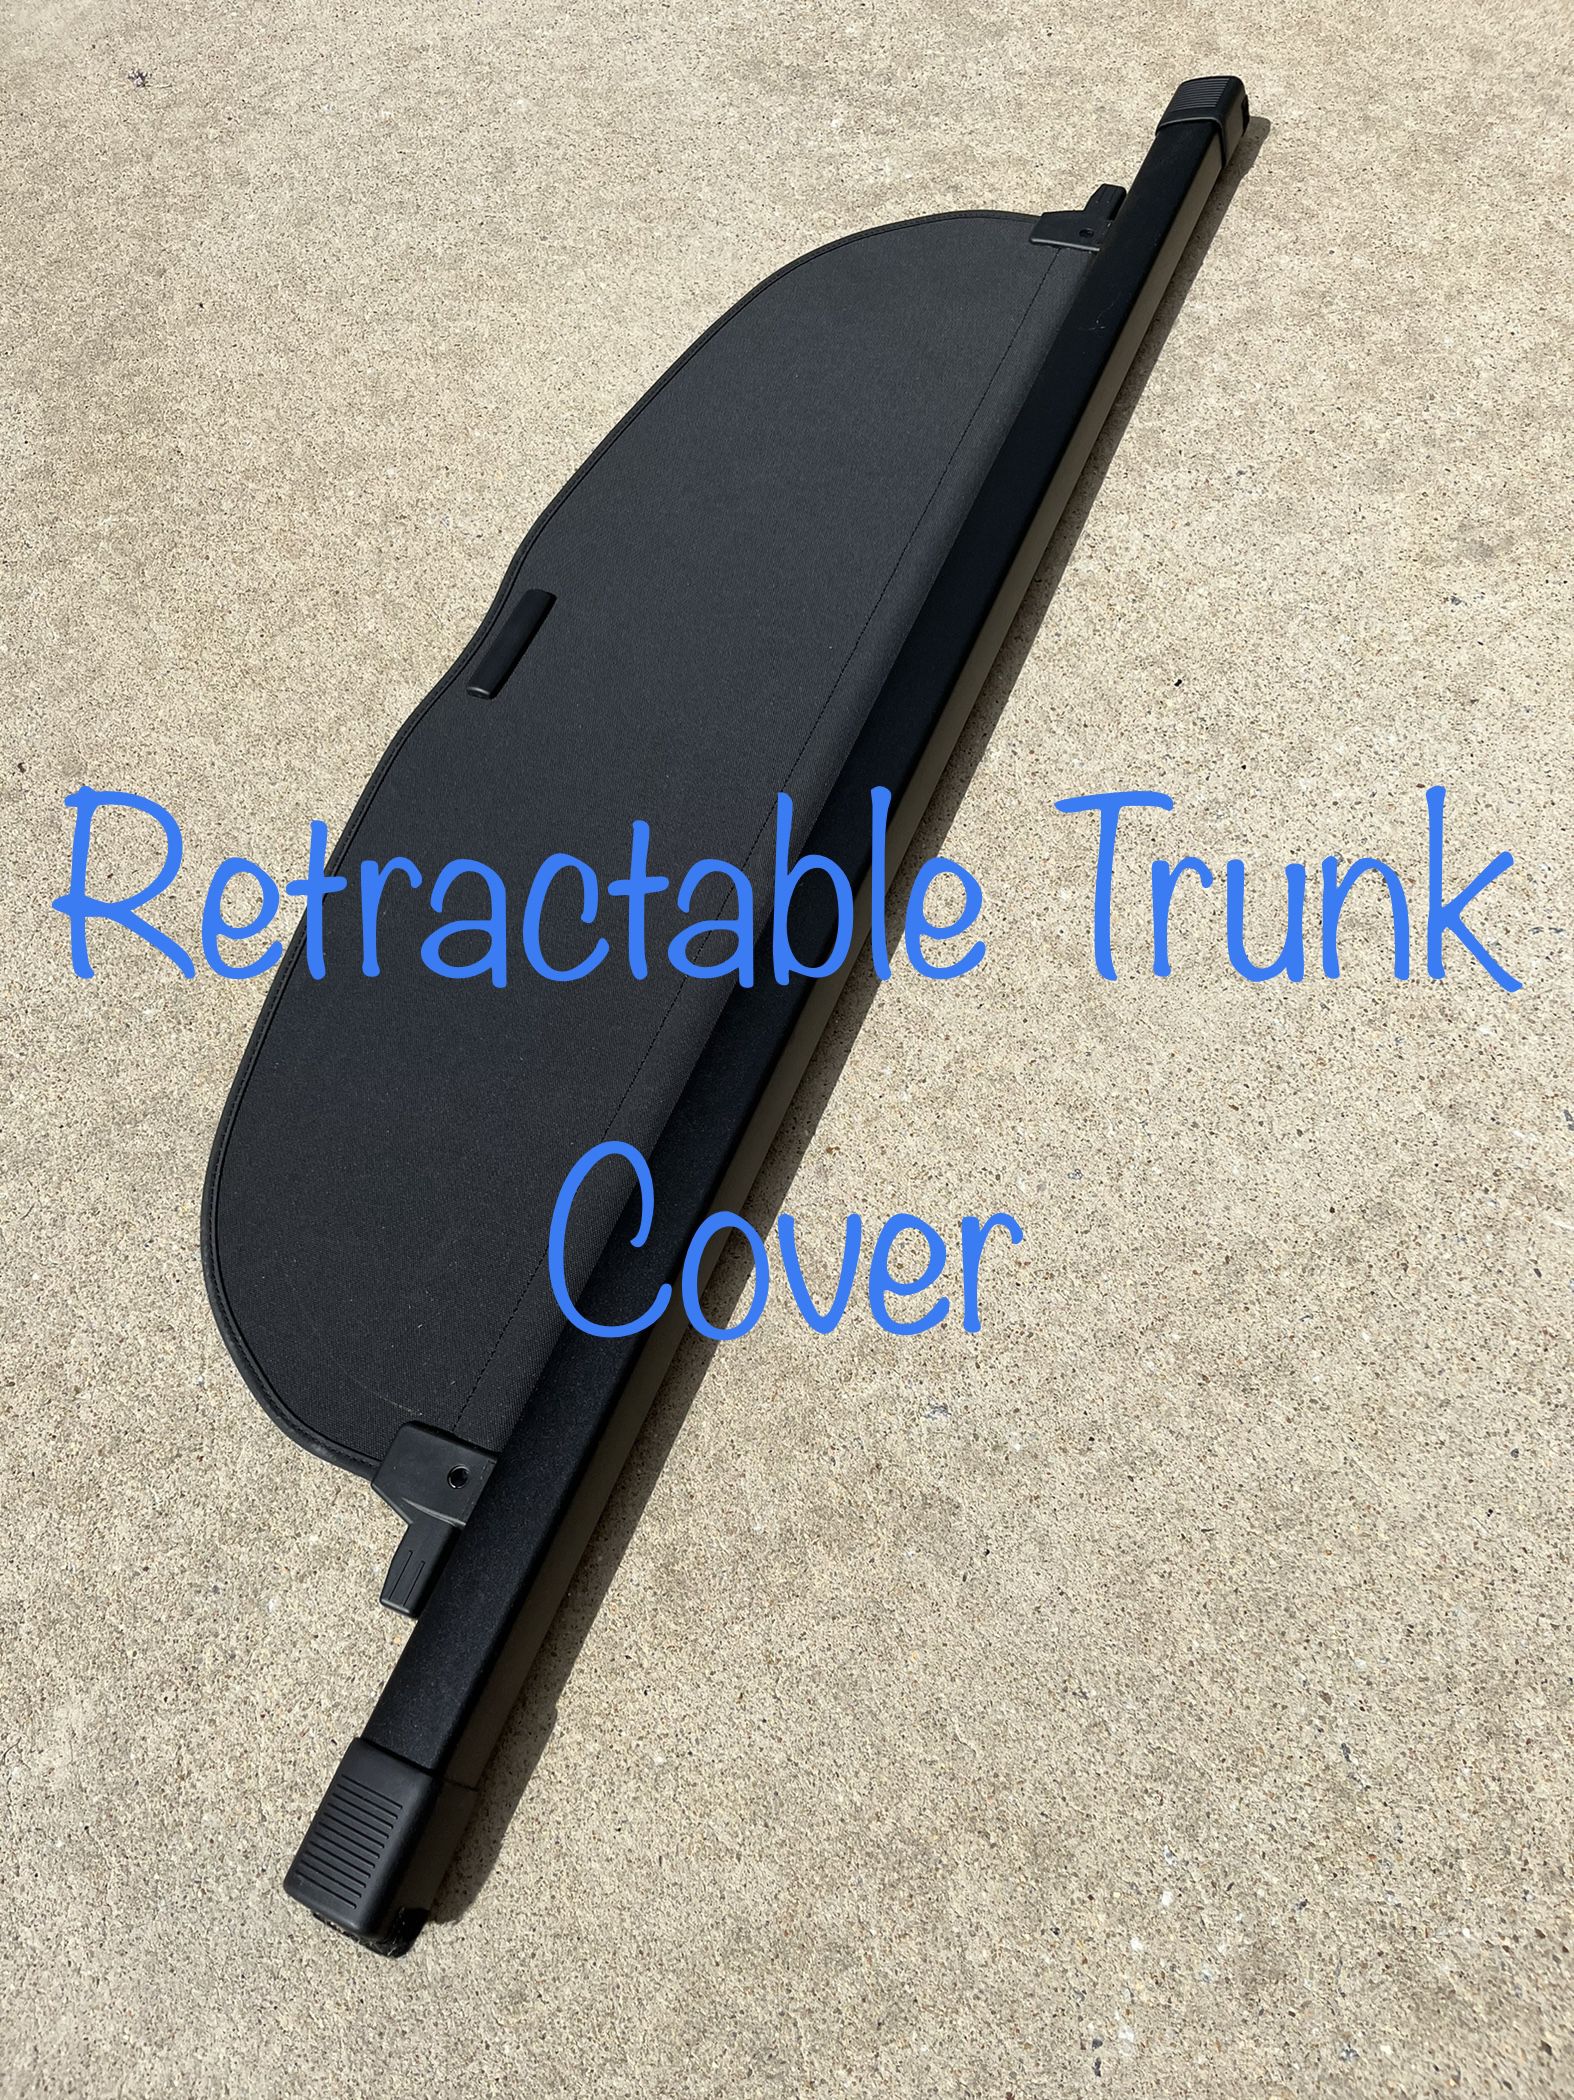 NEW Retractable Trunk Cover